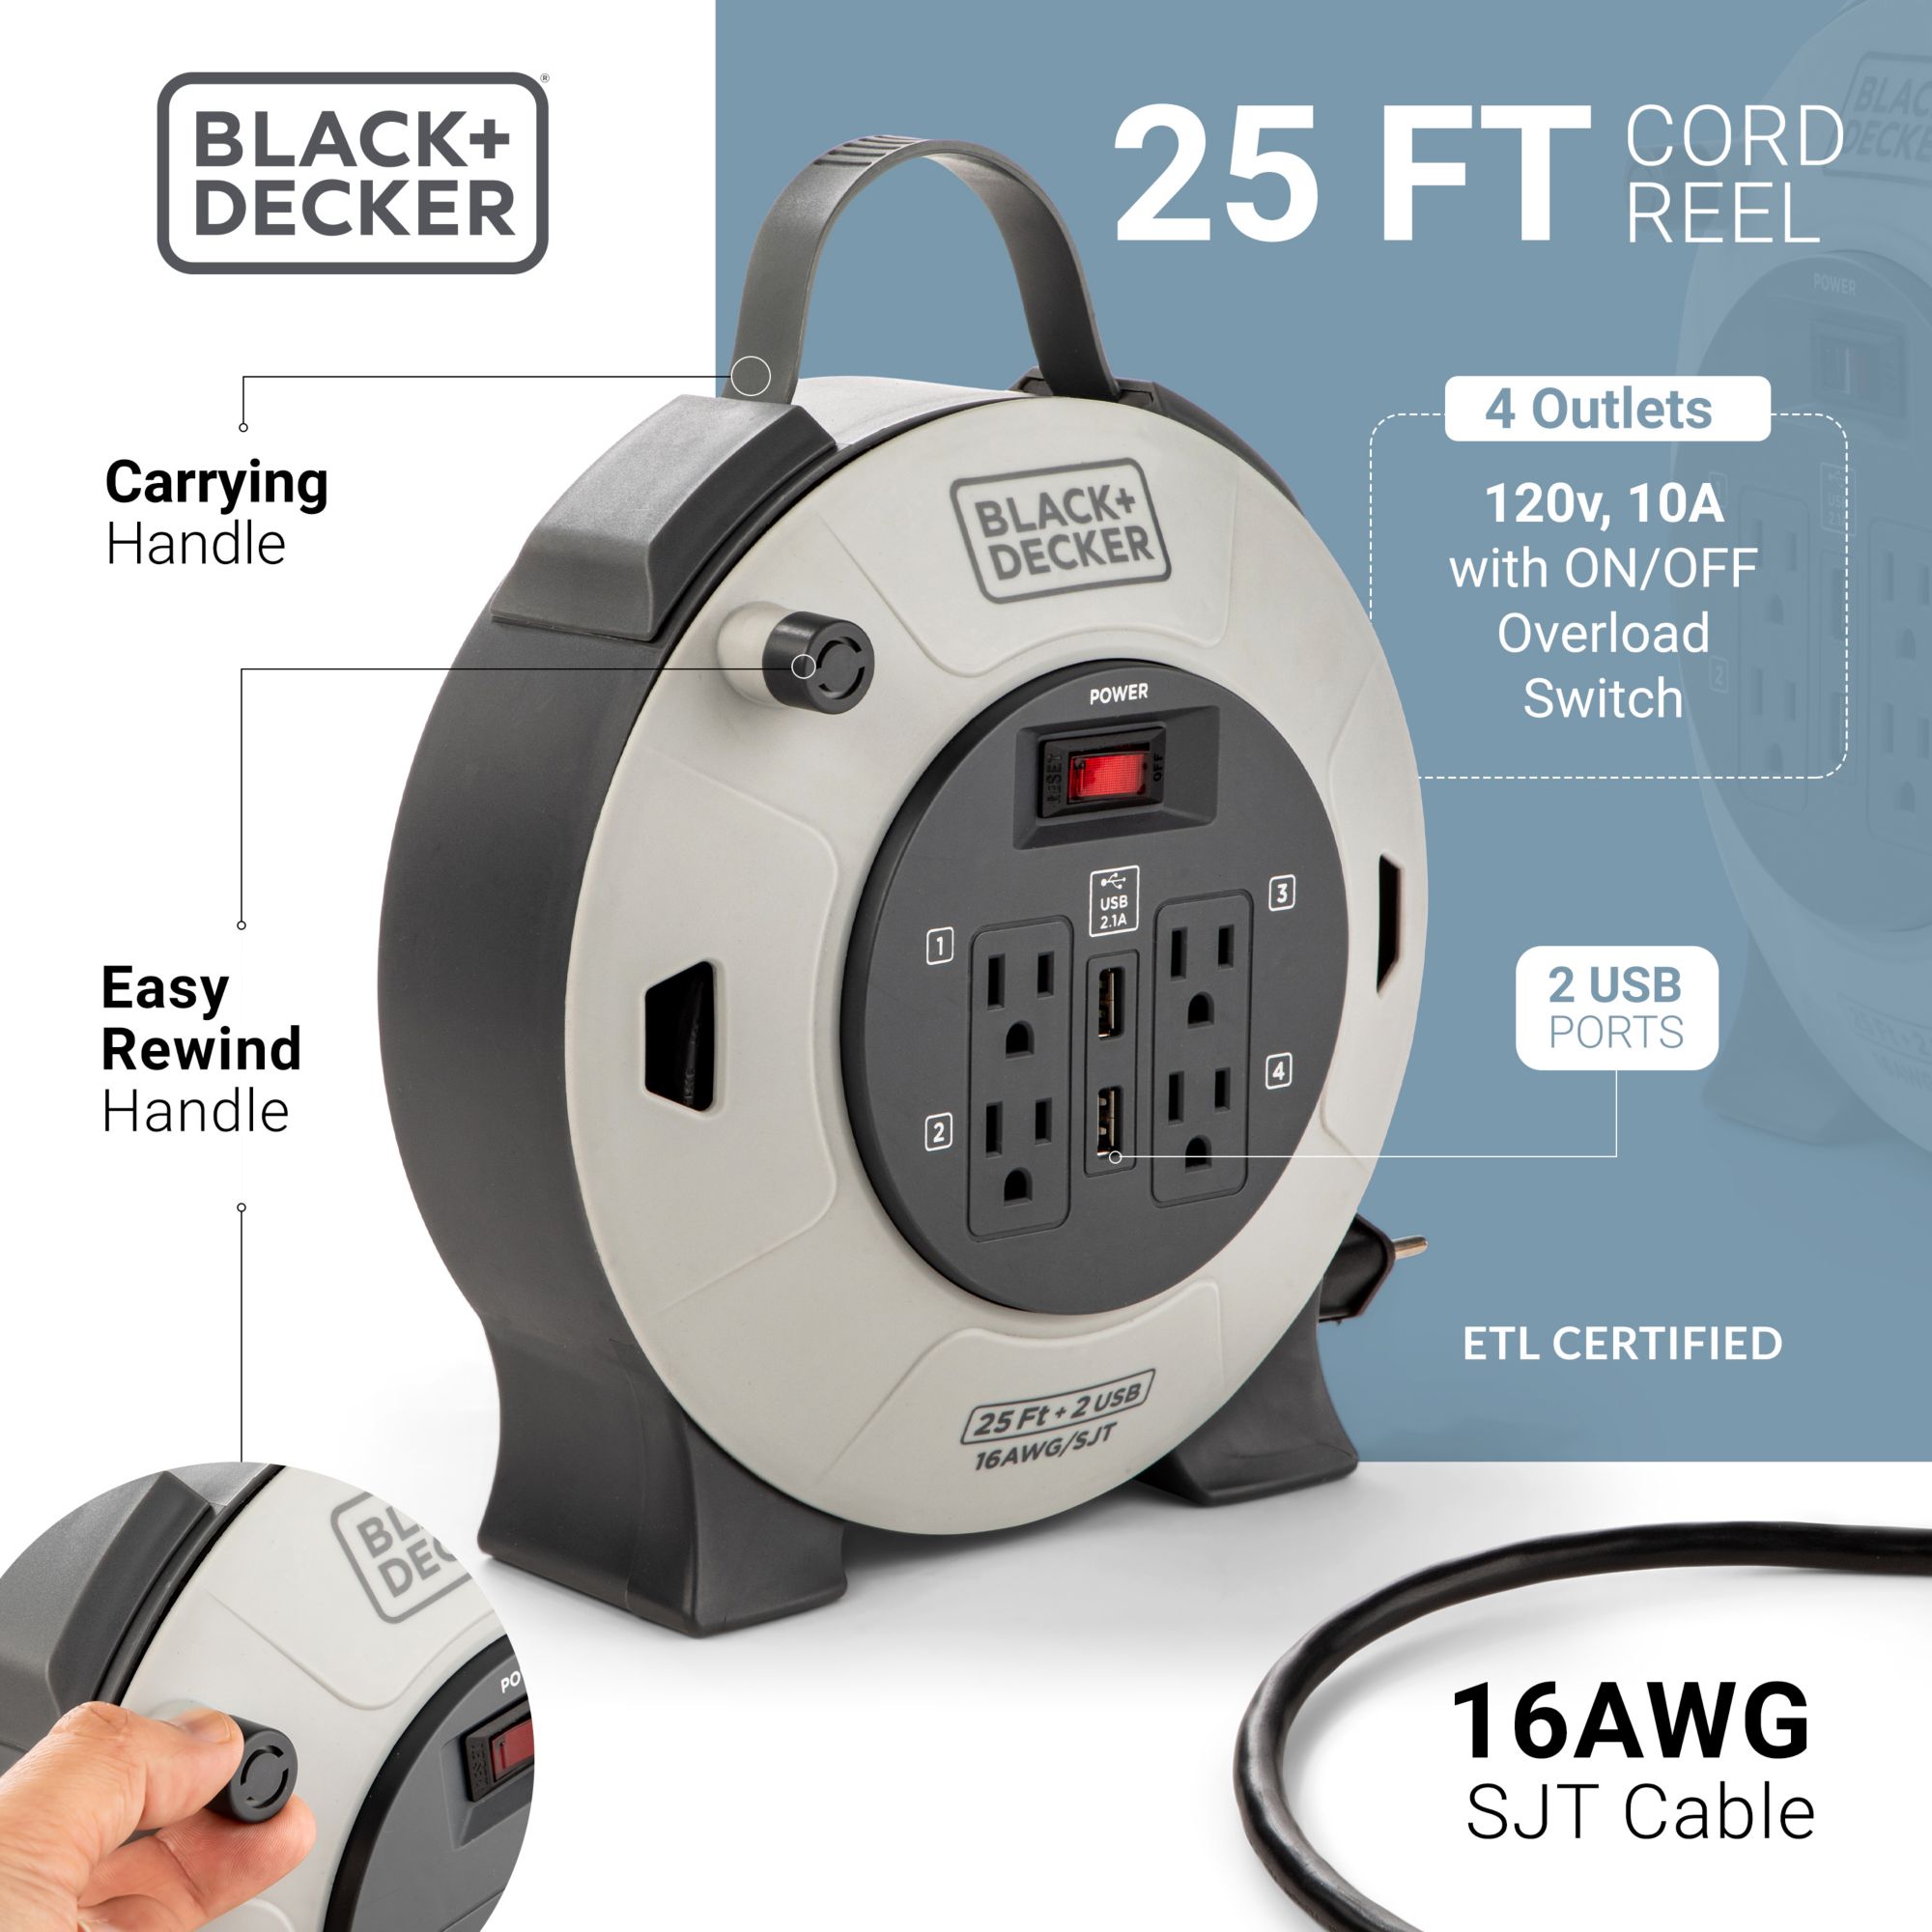 BLACK+DECKER 75 ft. 4 Outlets Retractable Extension Cord with 14